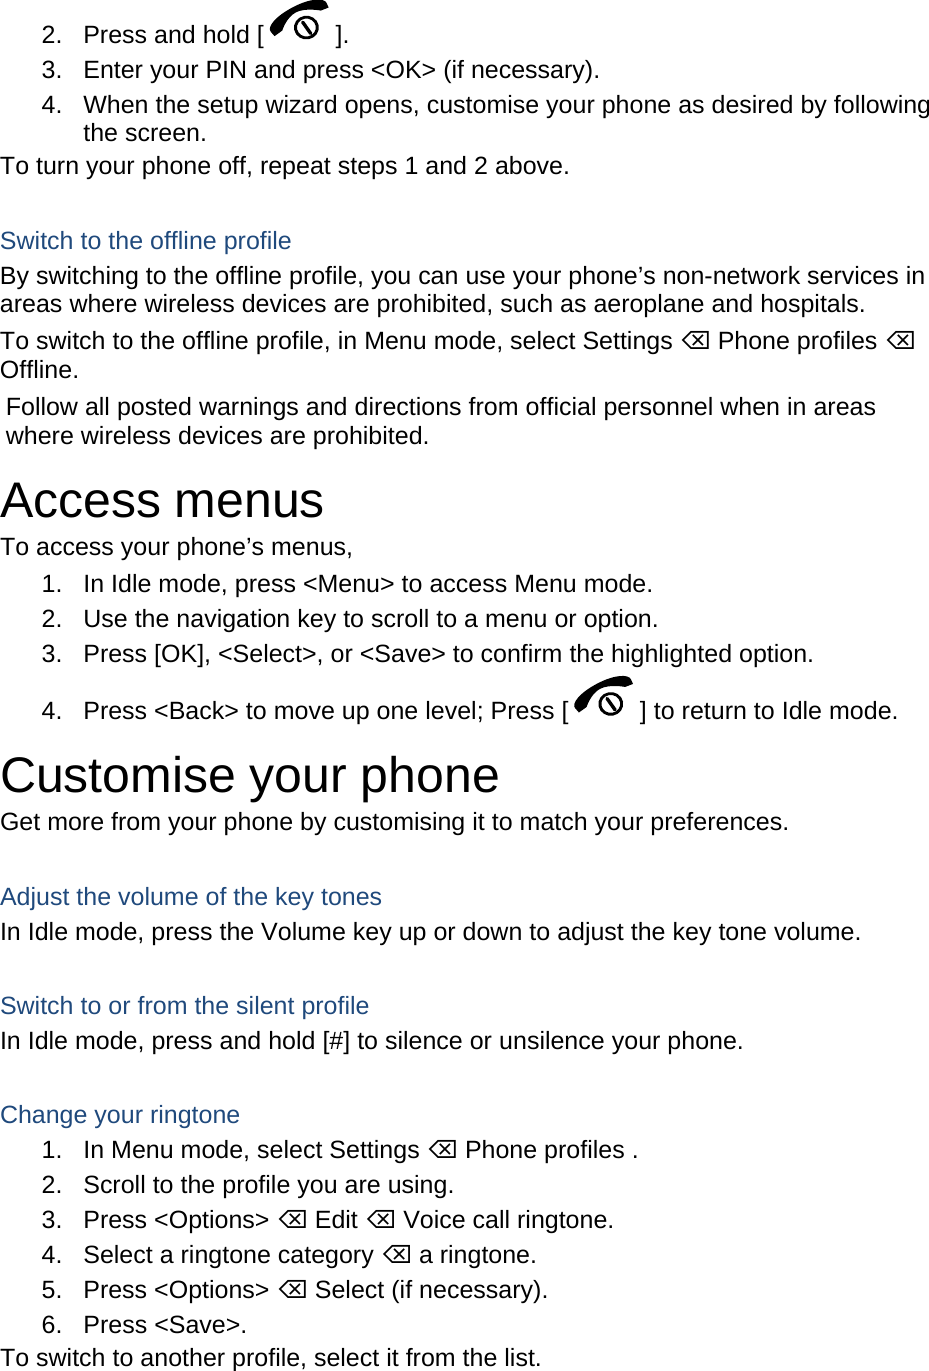 2.  Press and hold [ ]. 3.  Enter your PIN and press &lt;OK&gt; (if necessary). 4.  When the setup wizard opens, customise your phone as desired by following the screen. To turn your phone off, repeat steps 1 and 2 above.  Switch to the offline profile By switching to the offline profile, you can use your phone’s non-network services in areas where wireless devices are prohibited, such as aeroplane and hospitals. To switch to the offline profile, in Menu mode, select Settings  Phone profiles  Offline. Follow all posted warnings and directions from official personnel when in areas where wireless devices are prohibited. Access menus To access your phone’s menus, 1.  In Idle mode, press &lt;Menu&gt; to access Menu mode. 2.  Use the navigation key to scroll to a menu or option. 3.  Press [OK], &lt;Select&gt;, or &lt;Save&gt; to confirm the highlighted option. 4.  Press &lt;Back&gt; to move up one level; Press [ ] to return to Idle mode. Customise your phone Get more from your phone by customising it to match your preferences.  Adjust the volume of the key tones In Idle mode, press the Volume key up or down to adjust the key tone volume.  Switch to or from the silent profile In Idle mode, press and hold [#] to silence or unsilence your phone.  Change your ringtone 1.  In Menu mode, select Settings  Phone profiles . 2.  Scroll to the profile you are using. 3. Press &lt;Options&gt;  Edit  Voice call ringtone. 4.  Select a ringtone category  a ringtone. 5. Press &lt;Options&gt;  Select (if necessary). 6. Press &lt;Save&gt;. To switch to another profile, select it from the list.  